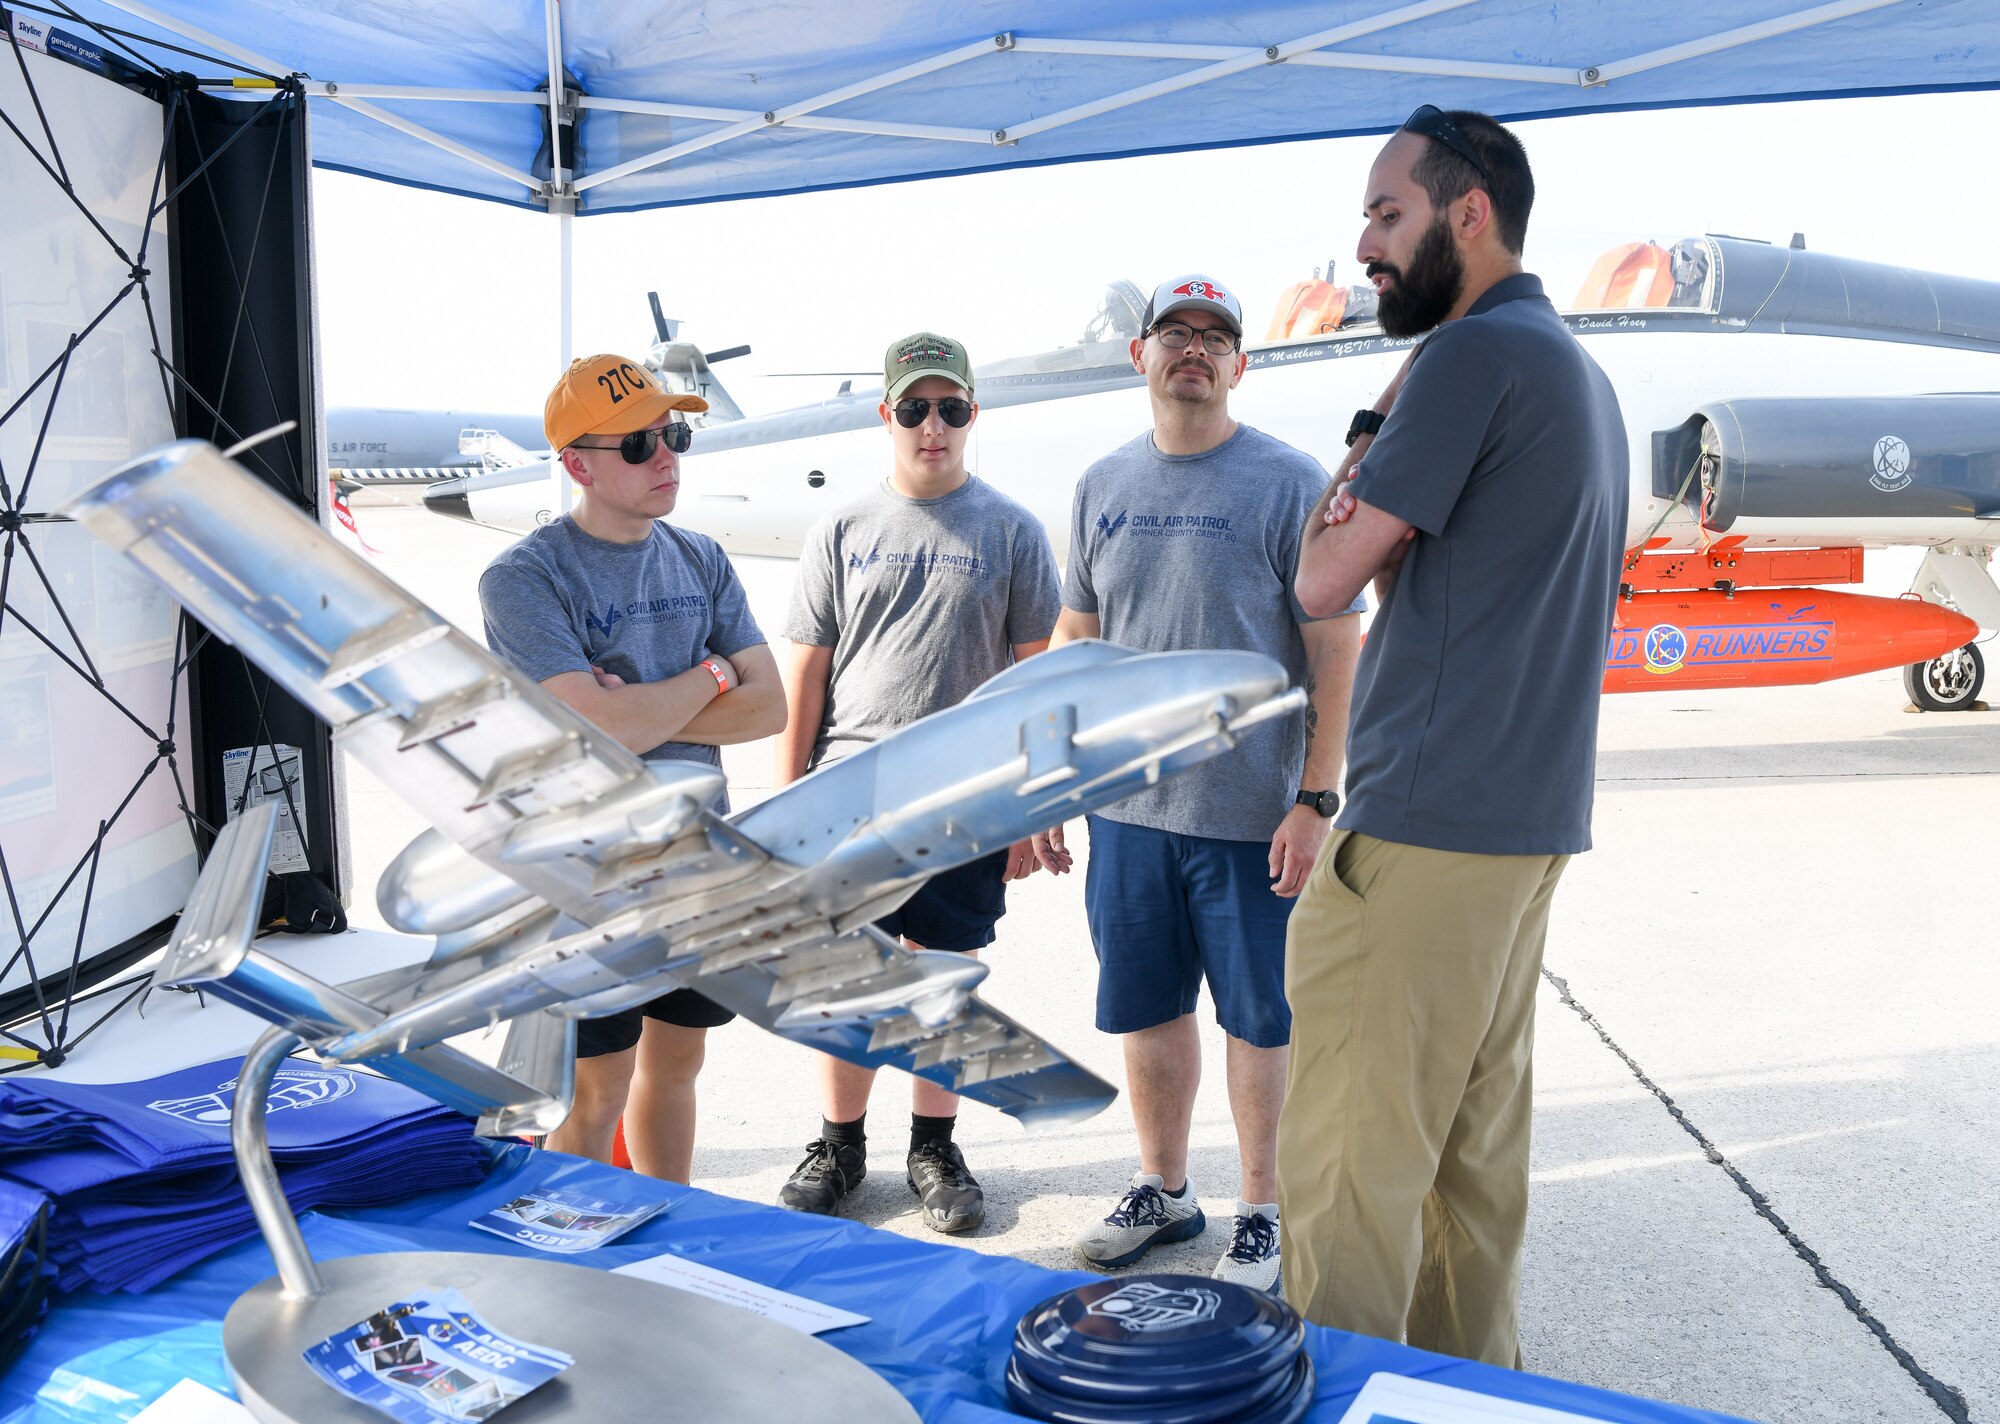 Group talking with scale model of aircraft in foreground